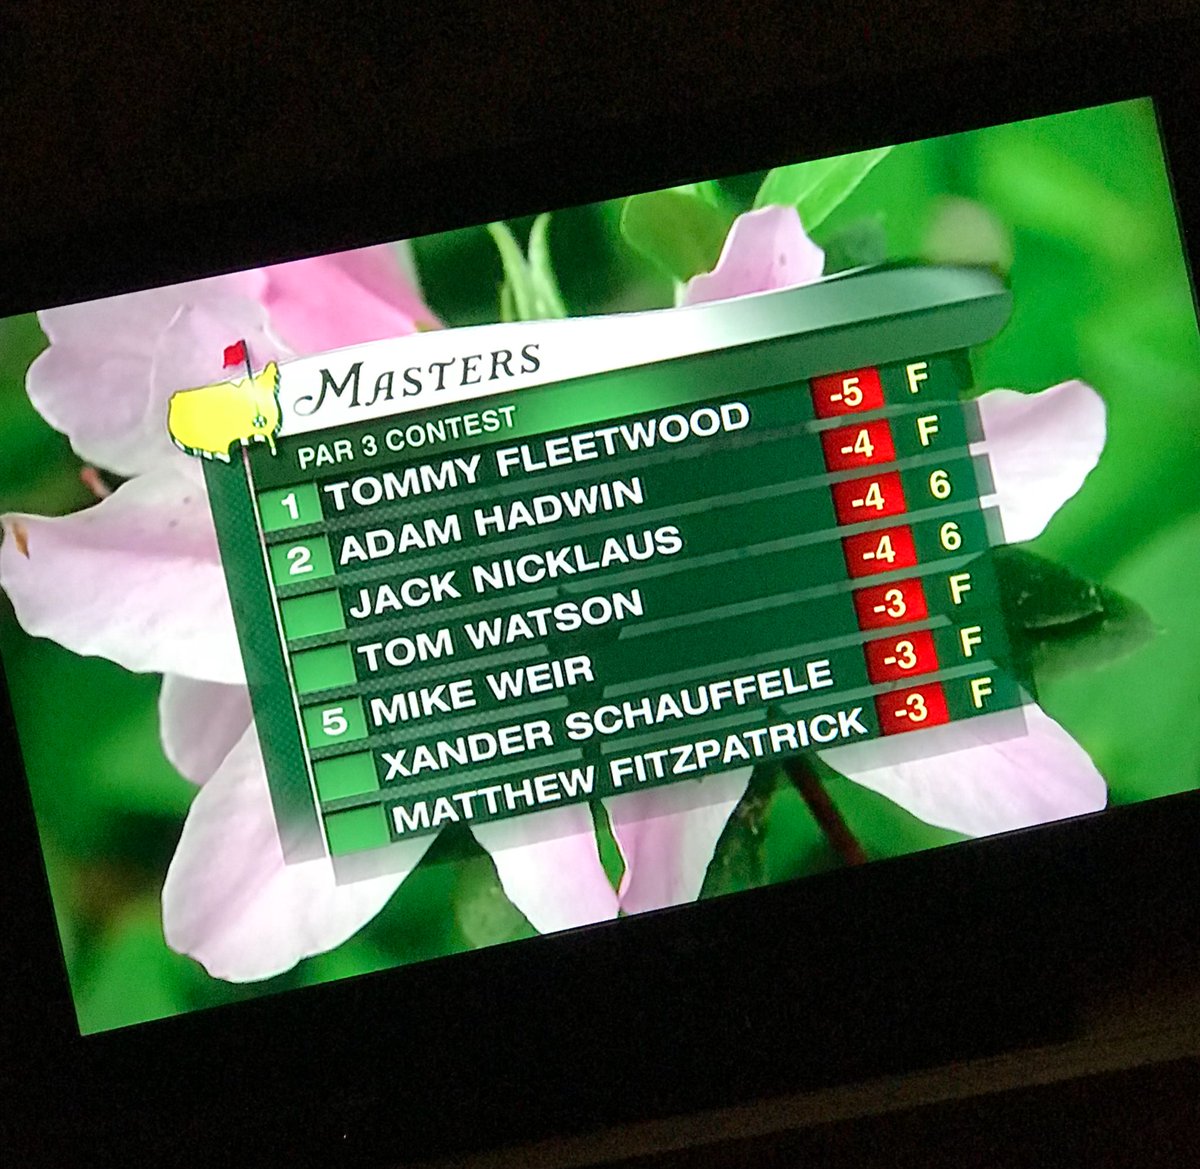 Nicklaus & Watson on the leaderboard...can’t beat The Masters! 

#Masters #par3contest